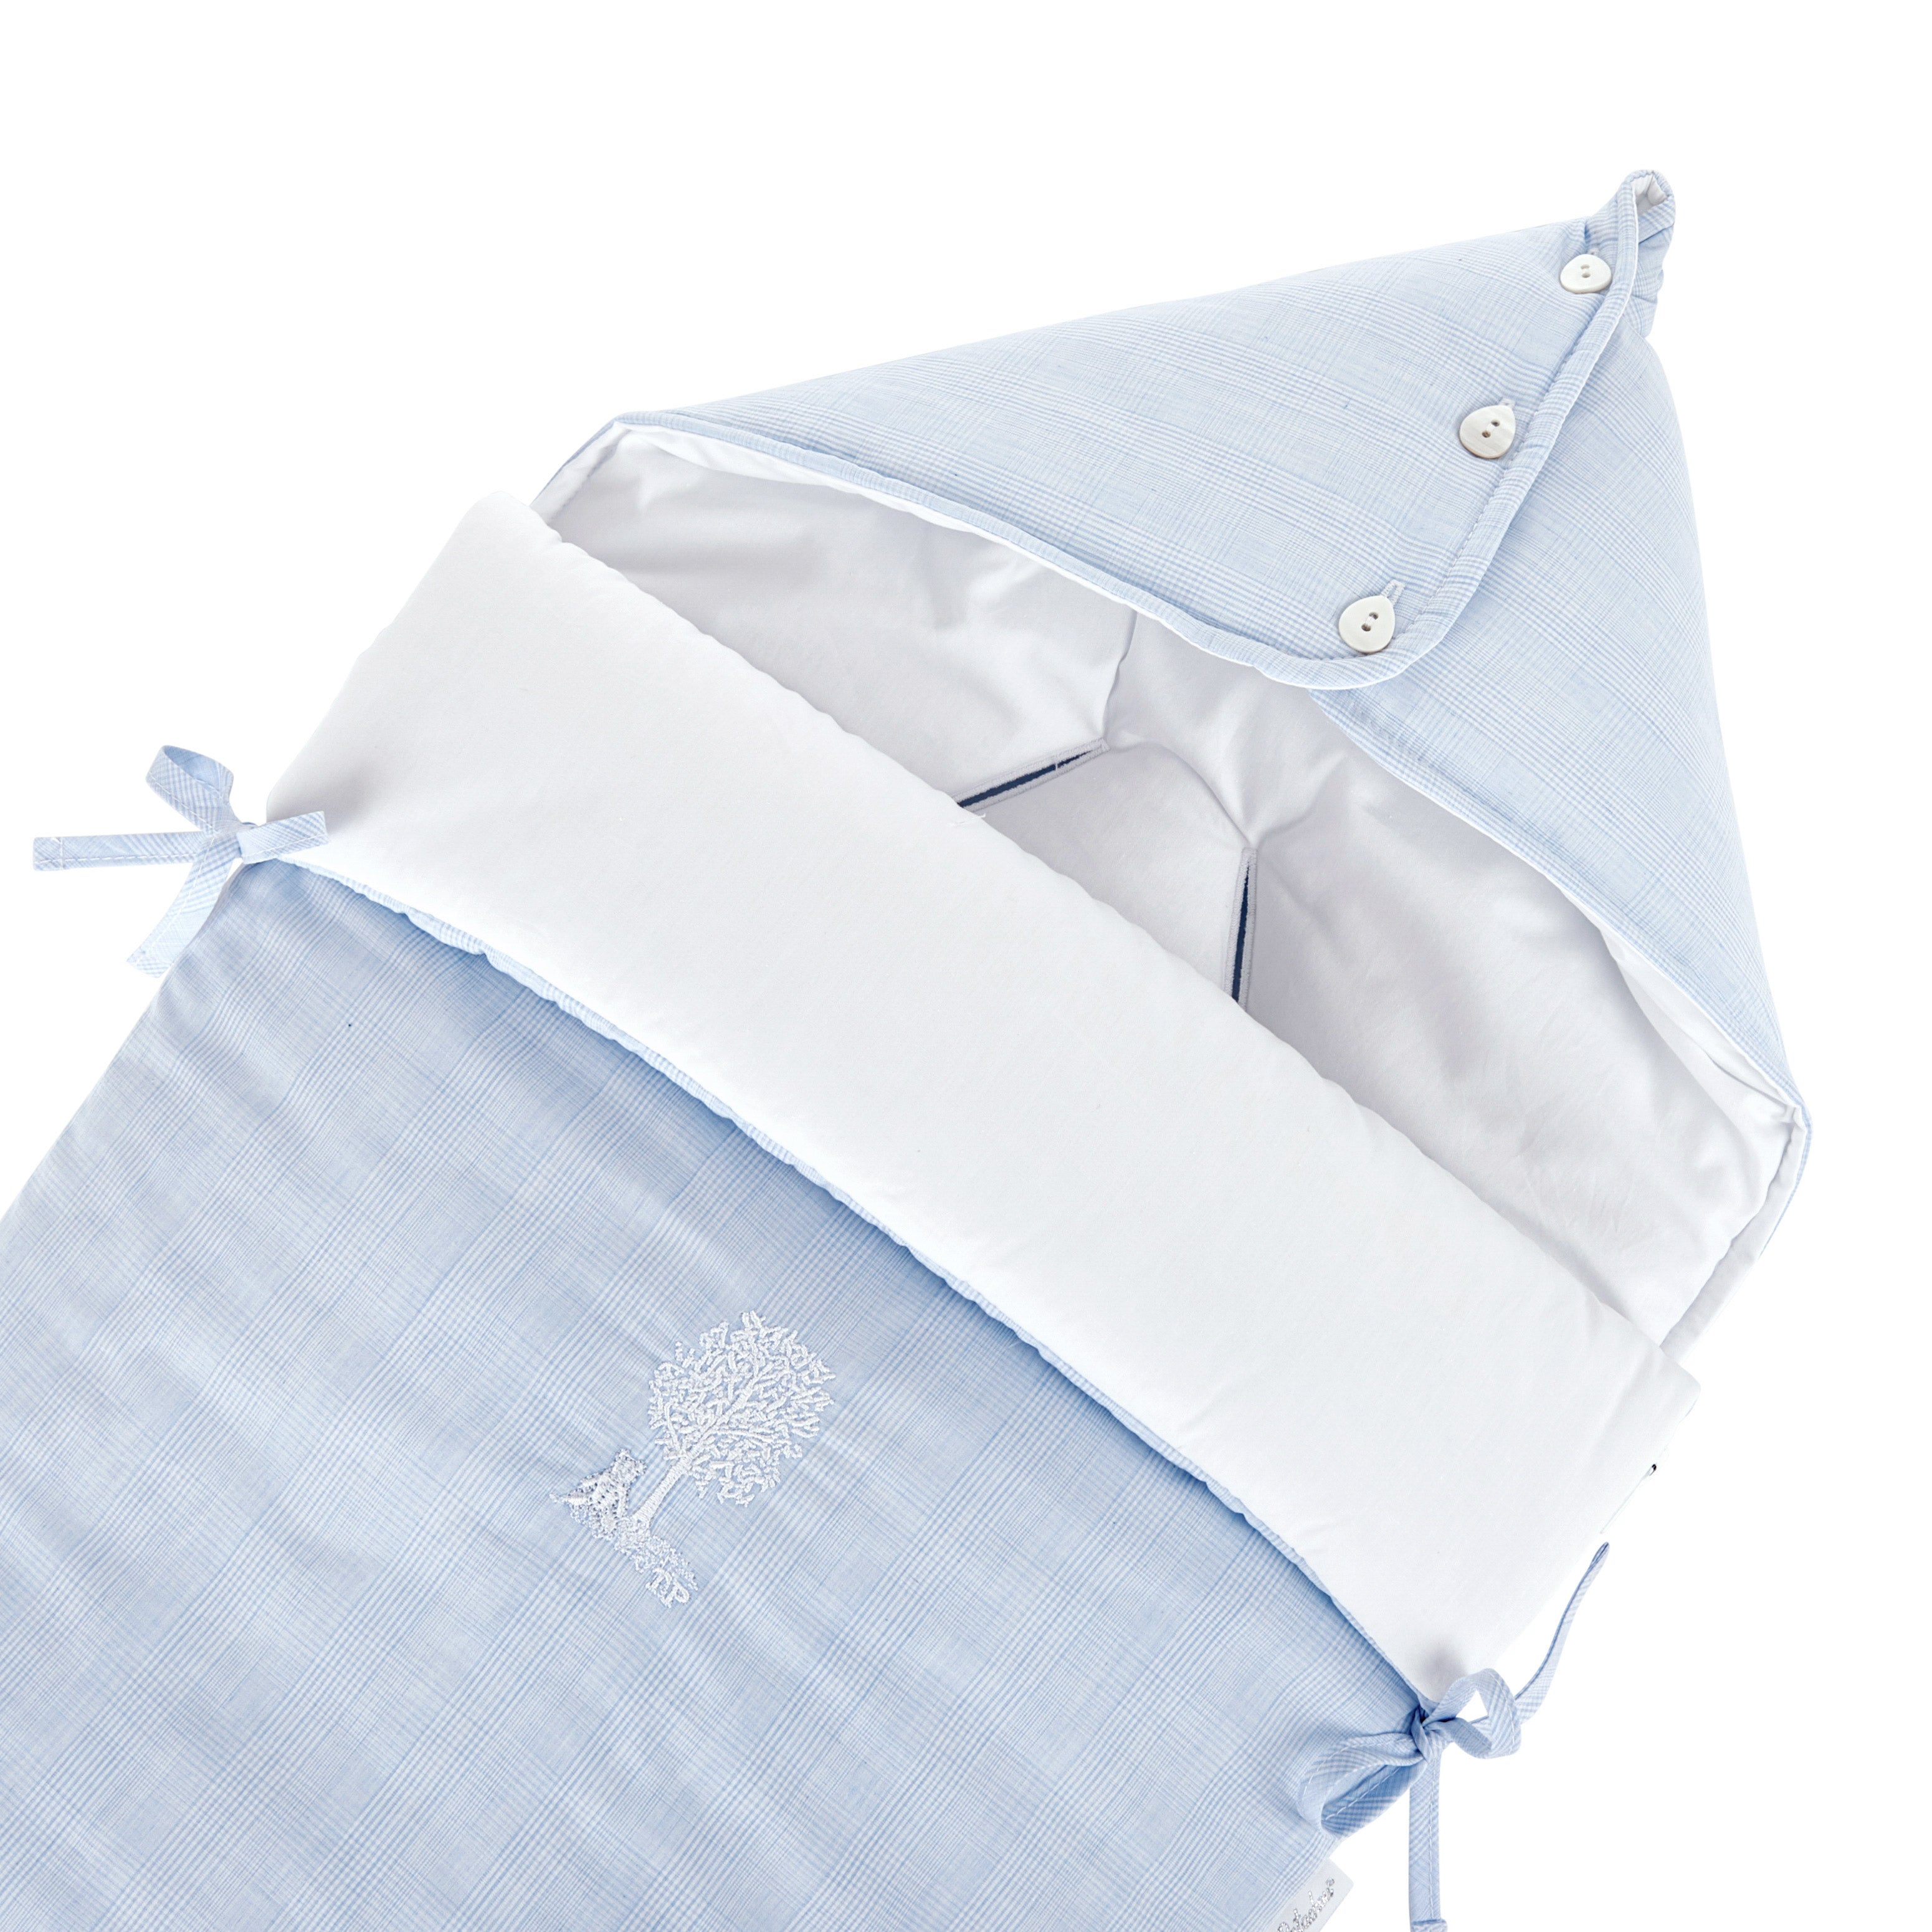 Theophile & Patachou Hooded Sleeping Bag for Car Seat “Pebble+” - Sweet Blue